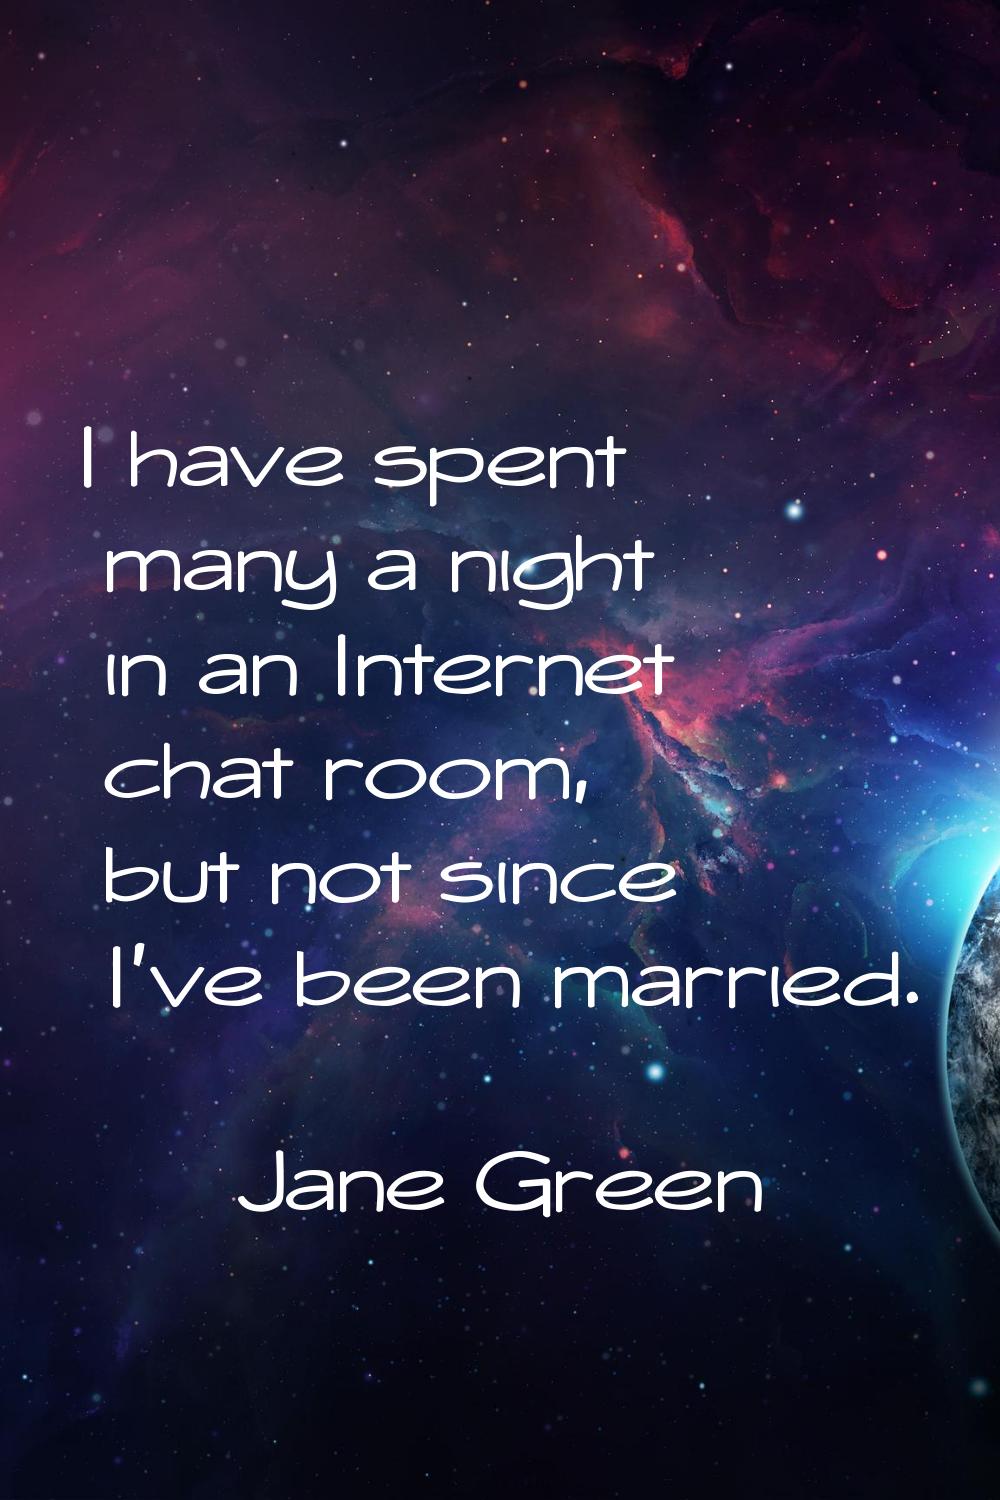 I have spent many a night in an Internet chat room, but not since I've been married.